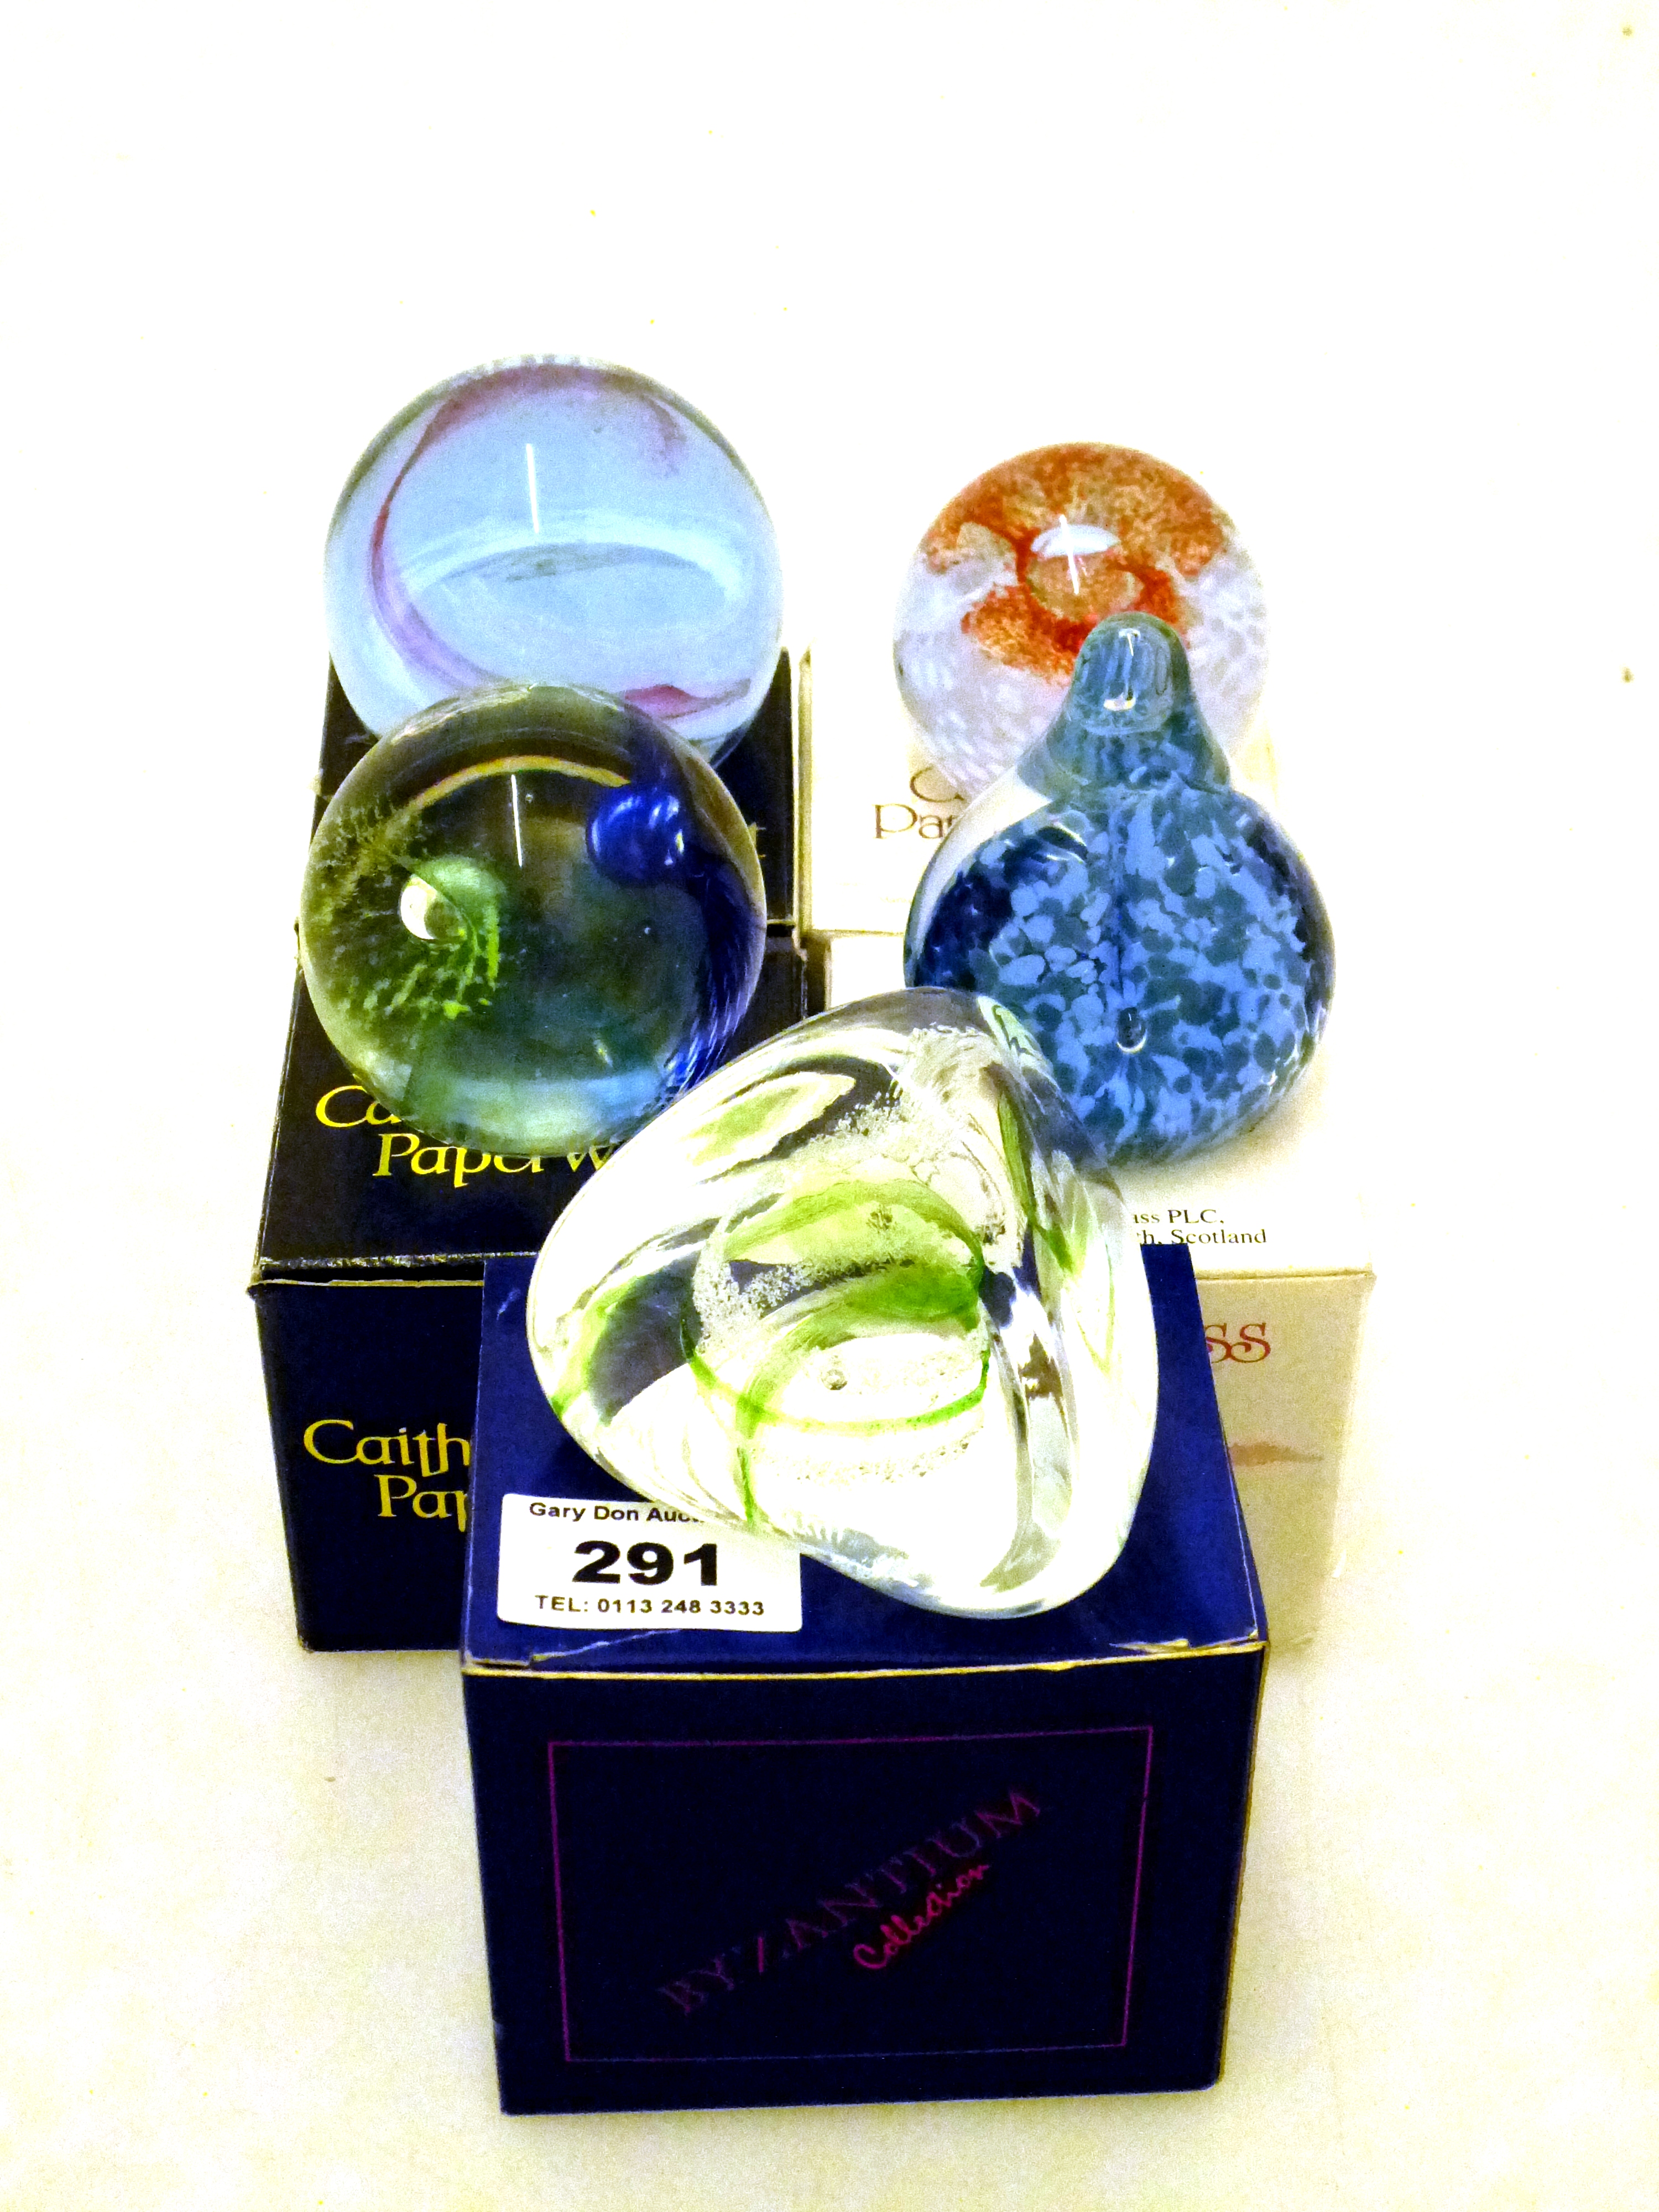 5 BOXED CAITHNESS PAPER WEIGHTS - WEAVER, LACEMAKER, RAINDROP, PASTEL AND PEBBLE